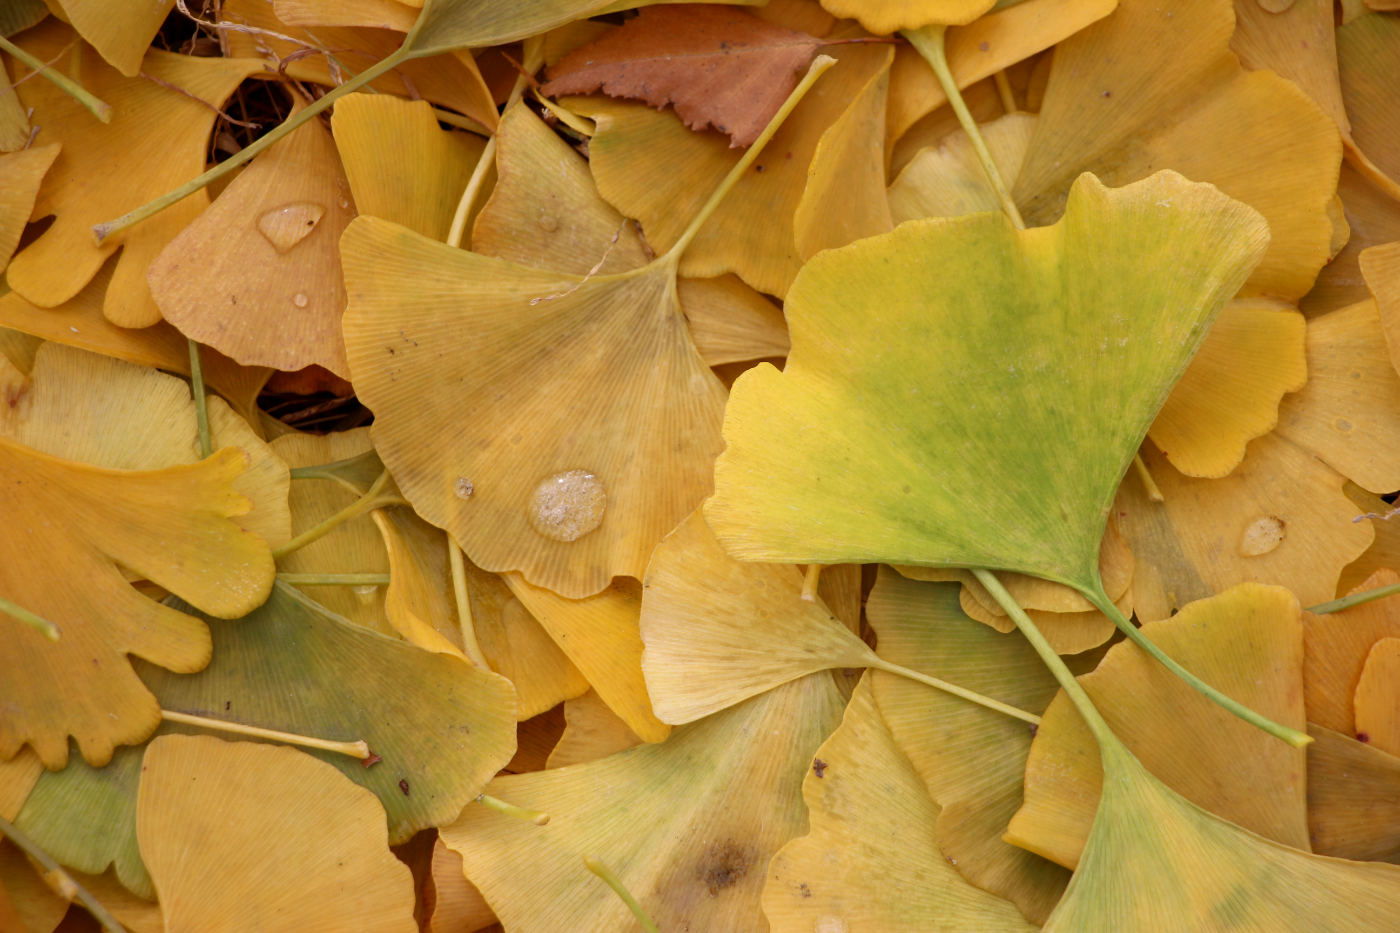 Overlaid pile of golden yellow fan-shaped leaves